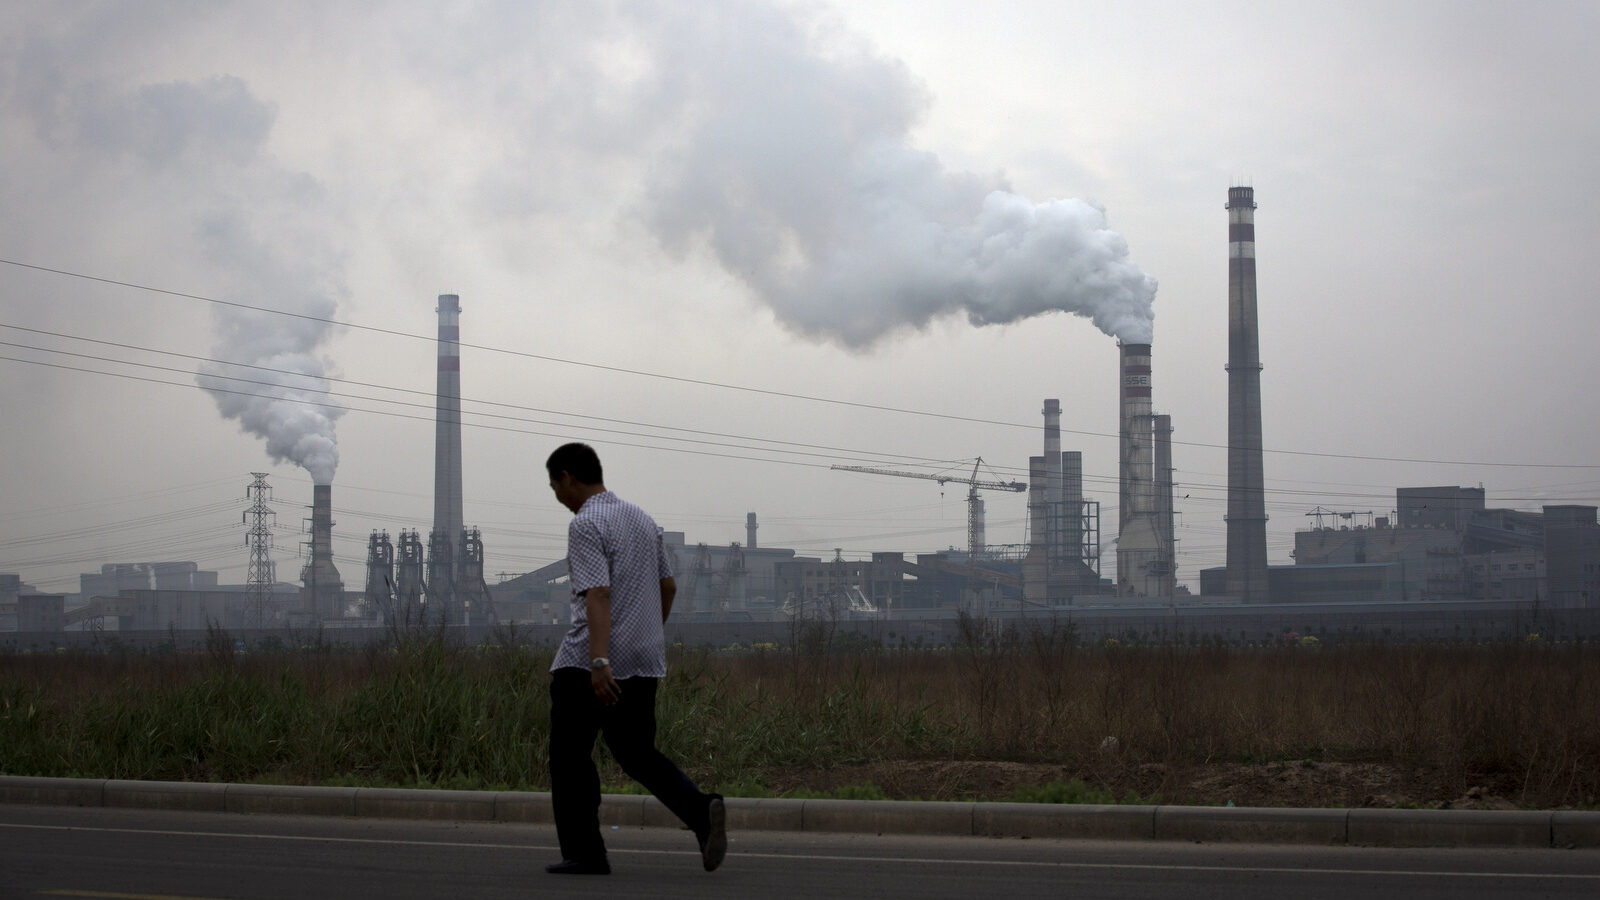 A man walks past a coal-powered steel plant in Tianjin, China. (AP/Andy Wong)